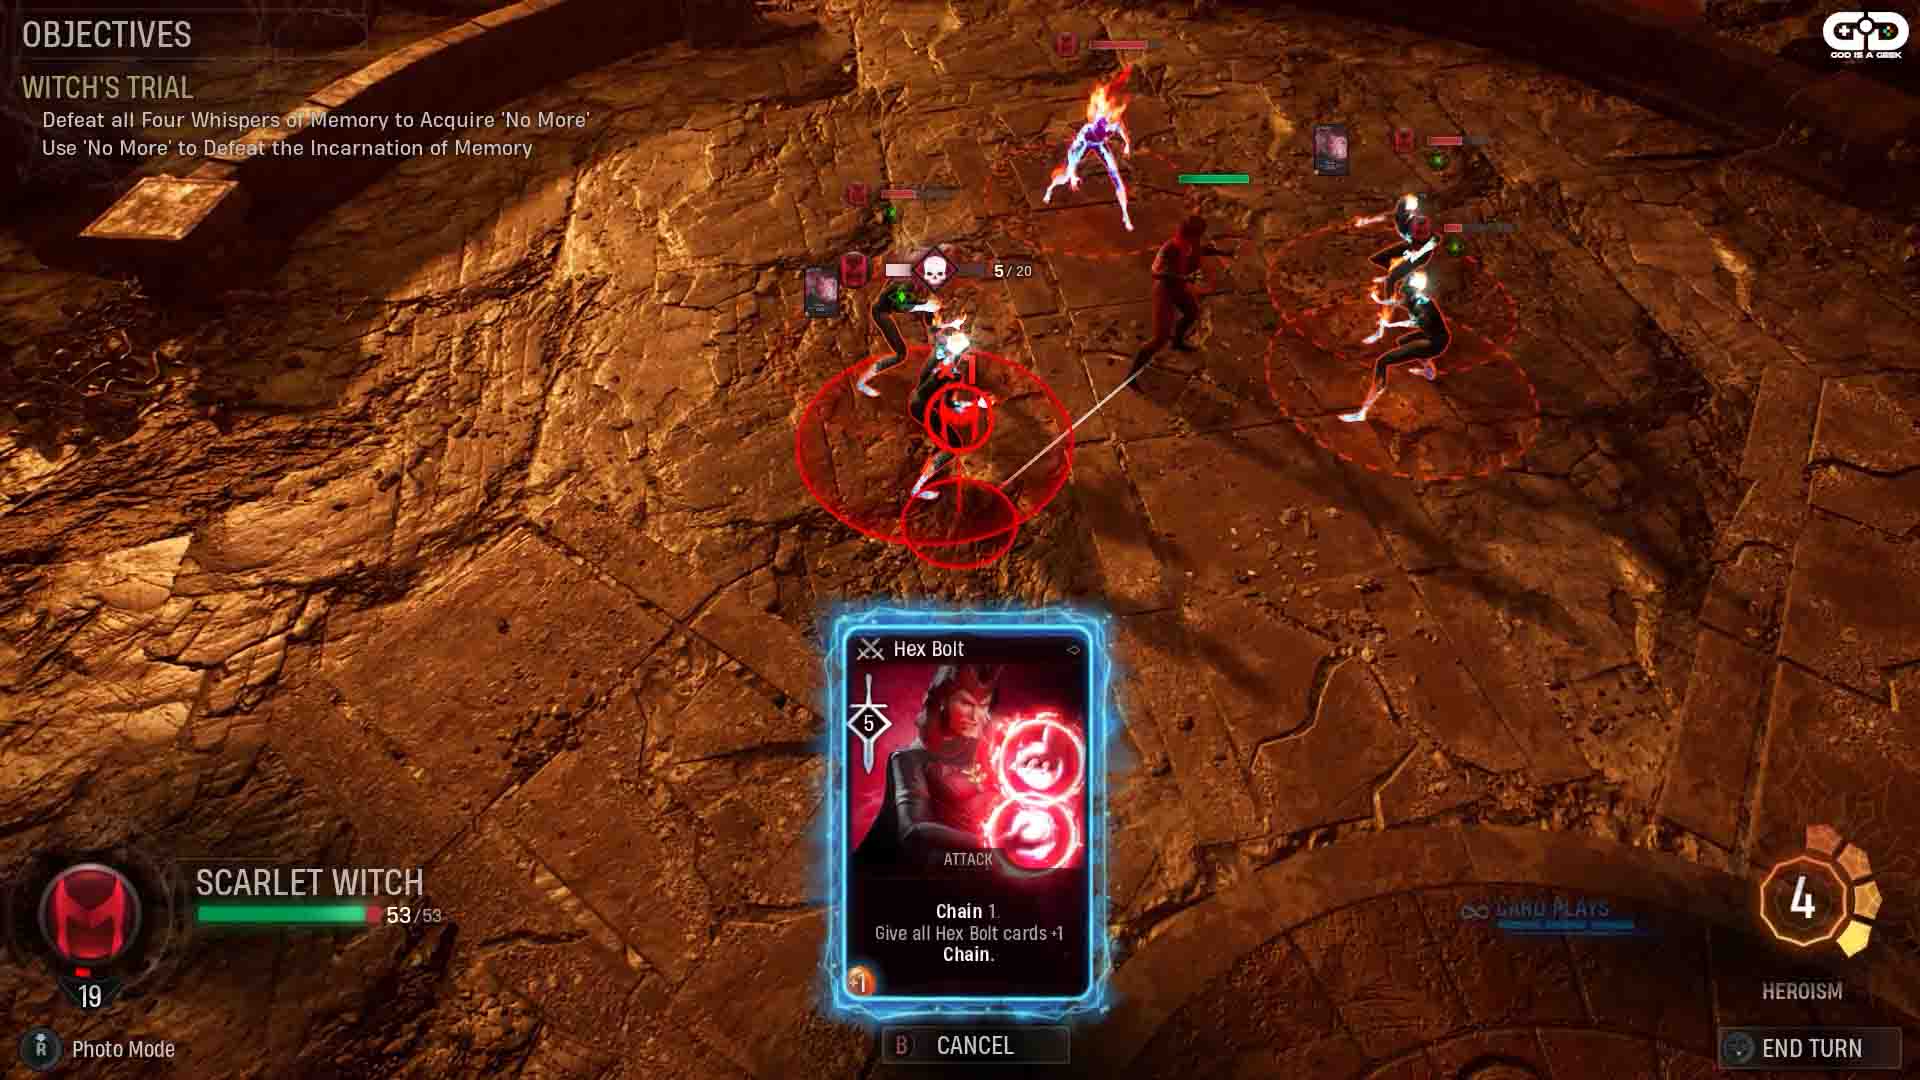 Midnight Suns Scarlet Witch Challenge Guide step 3